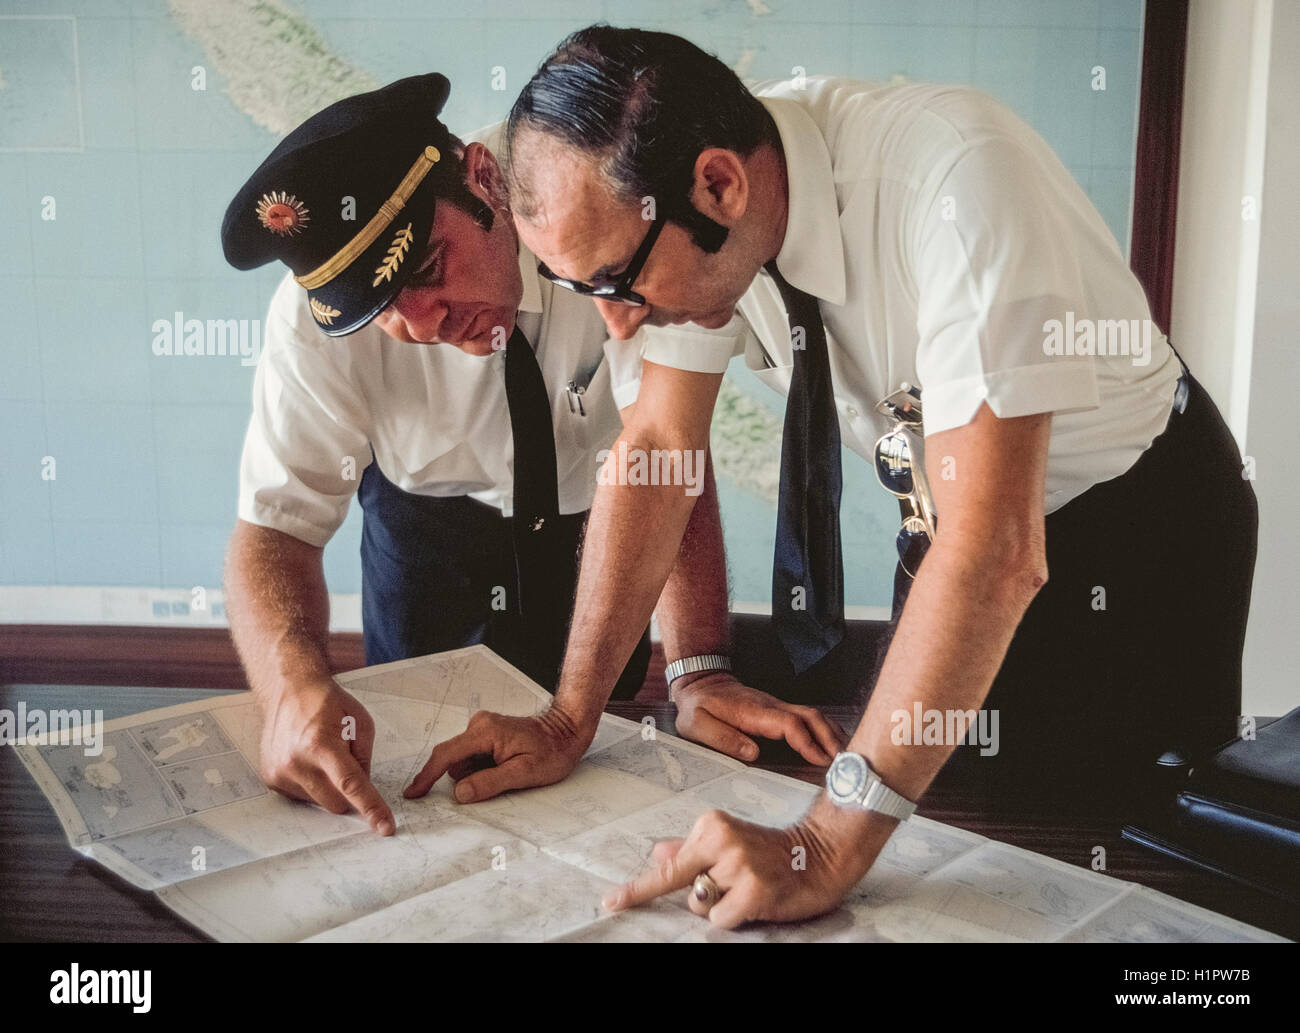 Captain Ross Zimmerman and copilot James McKenna study a map before embarking with their Convair 990 jet to fly a Modern Air Transport charter named "Polar Bird II." The plane carried 48 passengers via the North Pole and South Pole on a unique 32-day around-the-world tour organized by Hemphill World Air Cruises of Los Angeles, California, for the Travelers' Century Club. It was the most expensive world tour of the time (1970) at $9,760 per person. Stock Photo